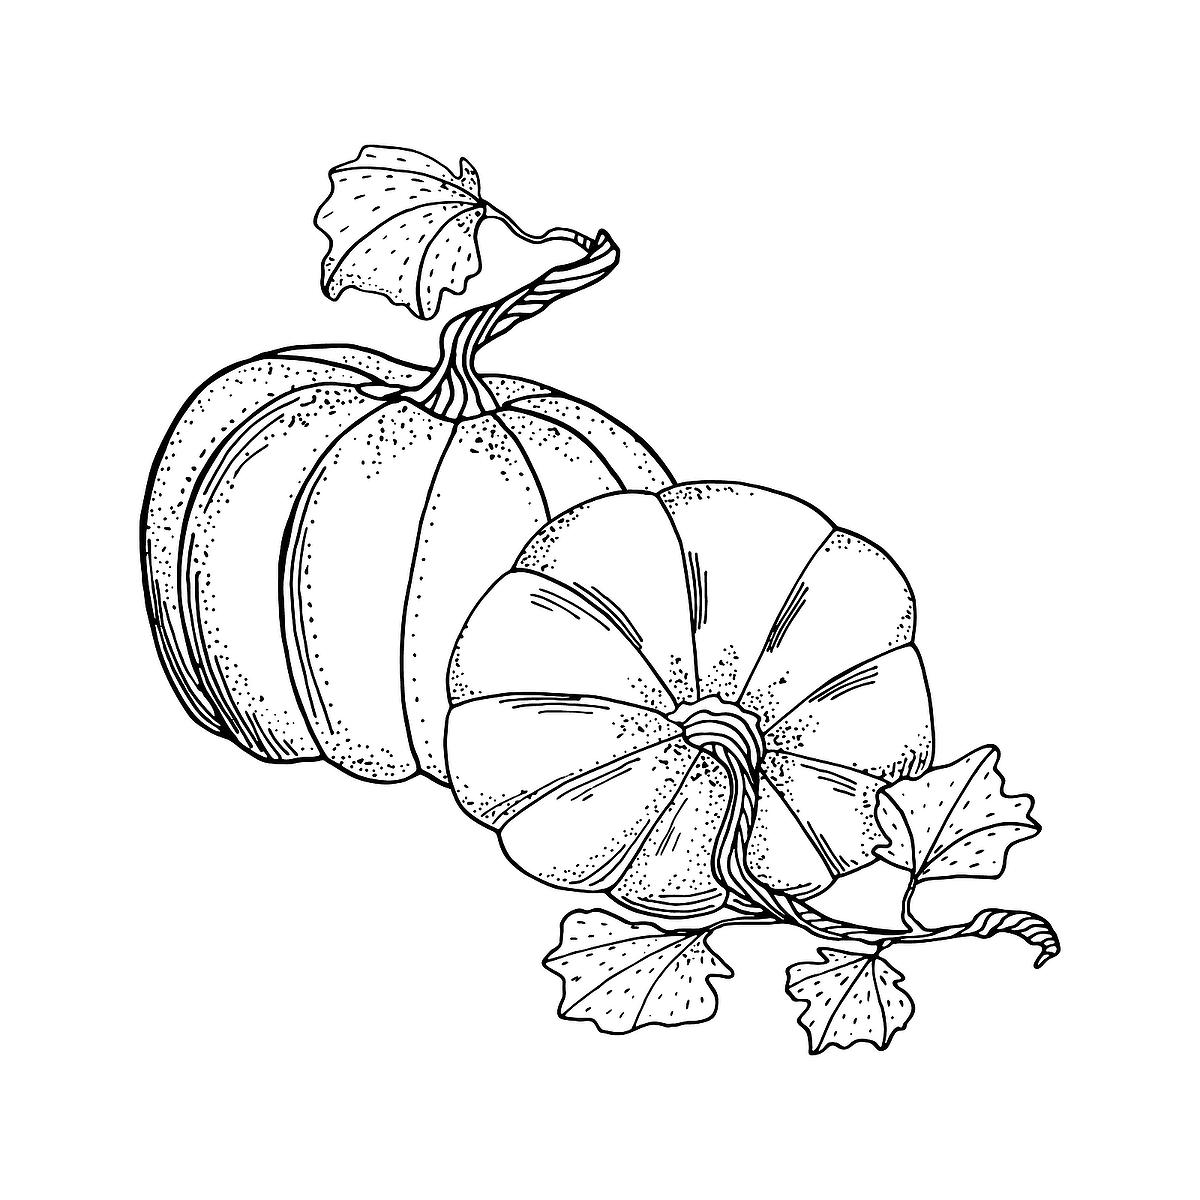 Pumpkin coloring pages free fun printable coloring pages of pumpkins that celebrate fall printables mom